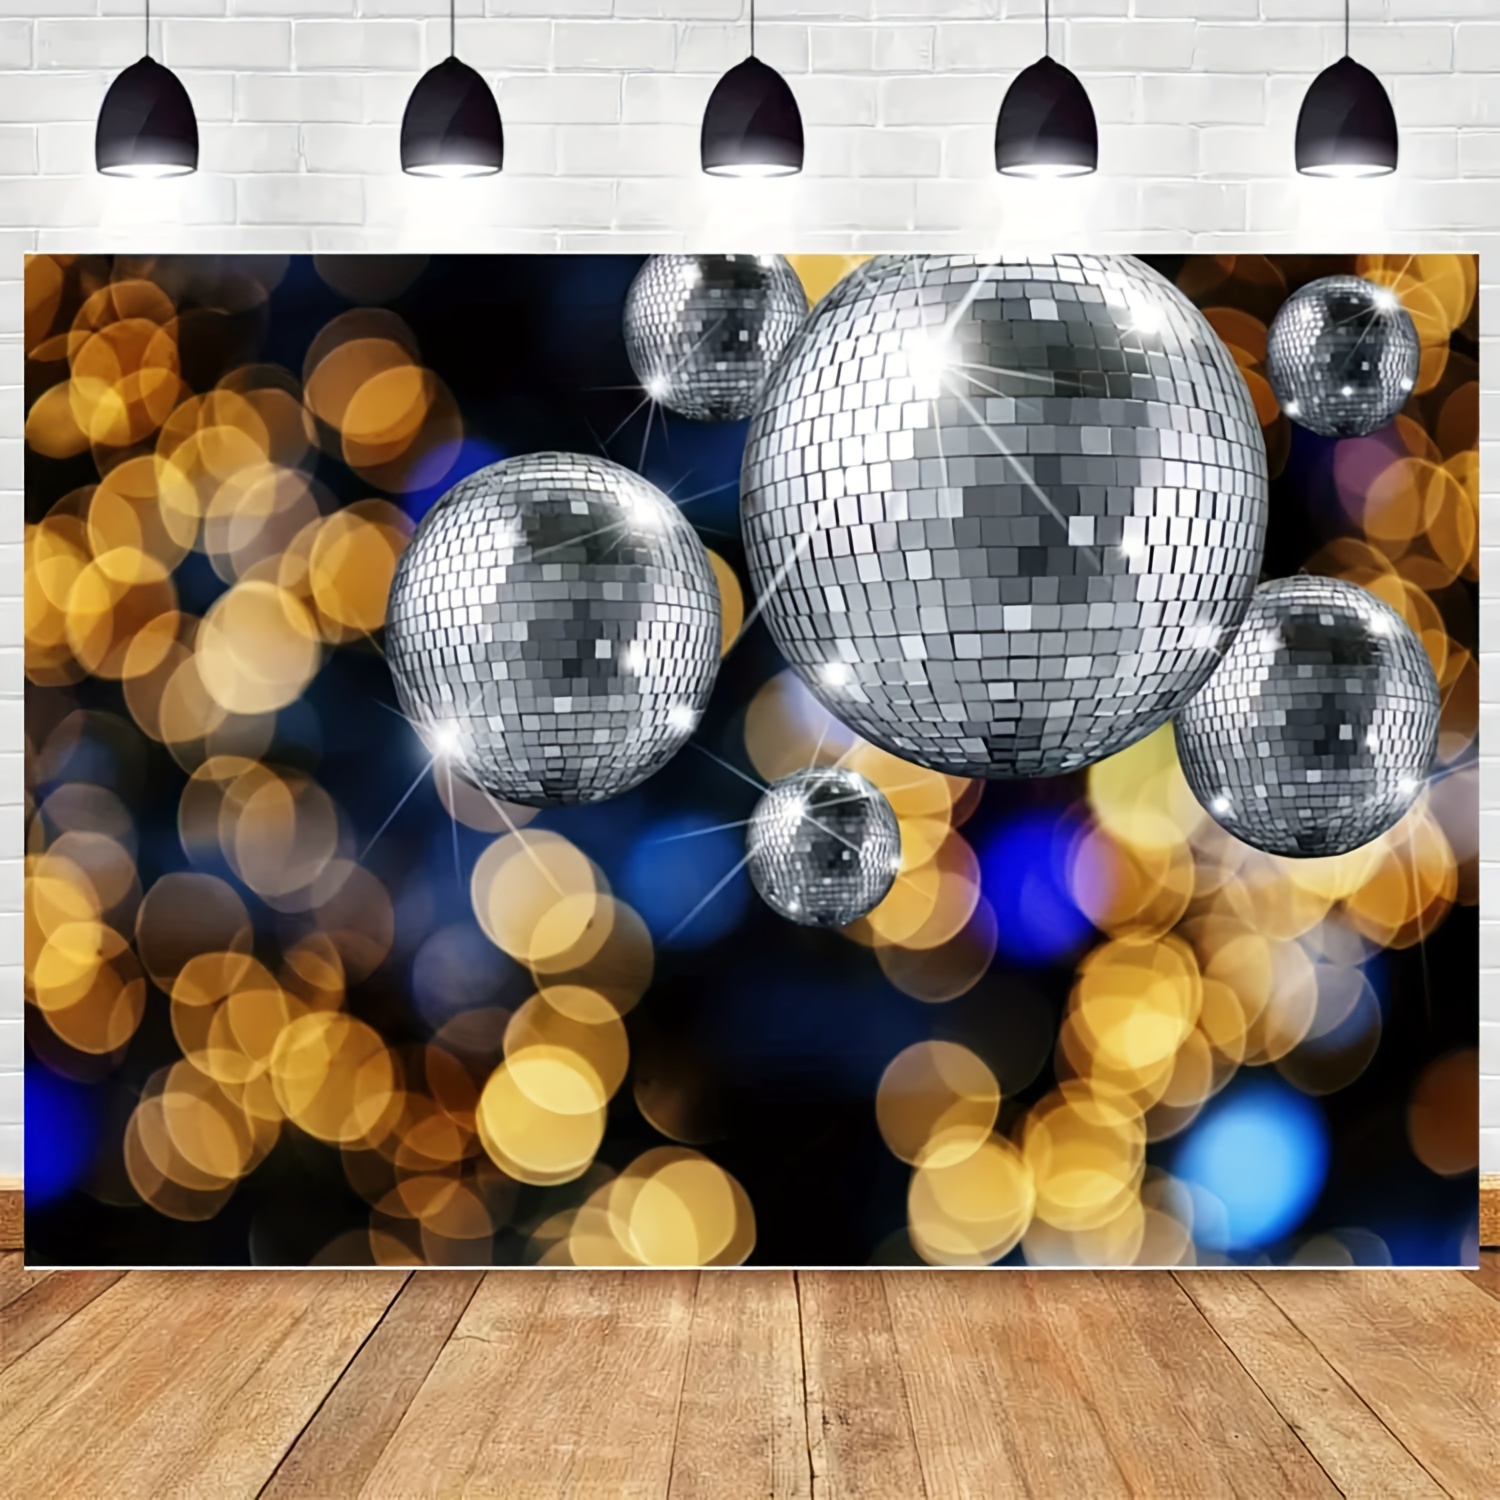 Disco Party Decorations Backdrop Dance Birthday Banner Backdrop